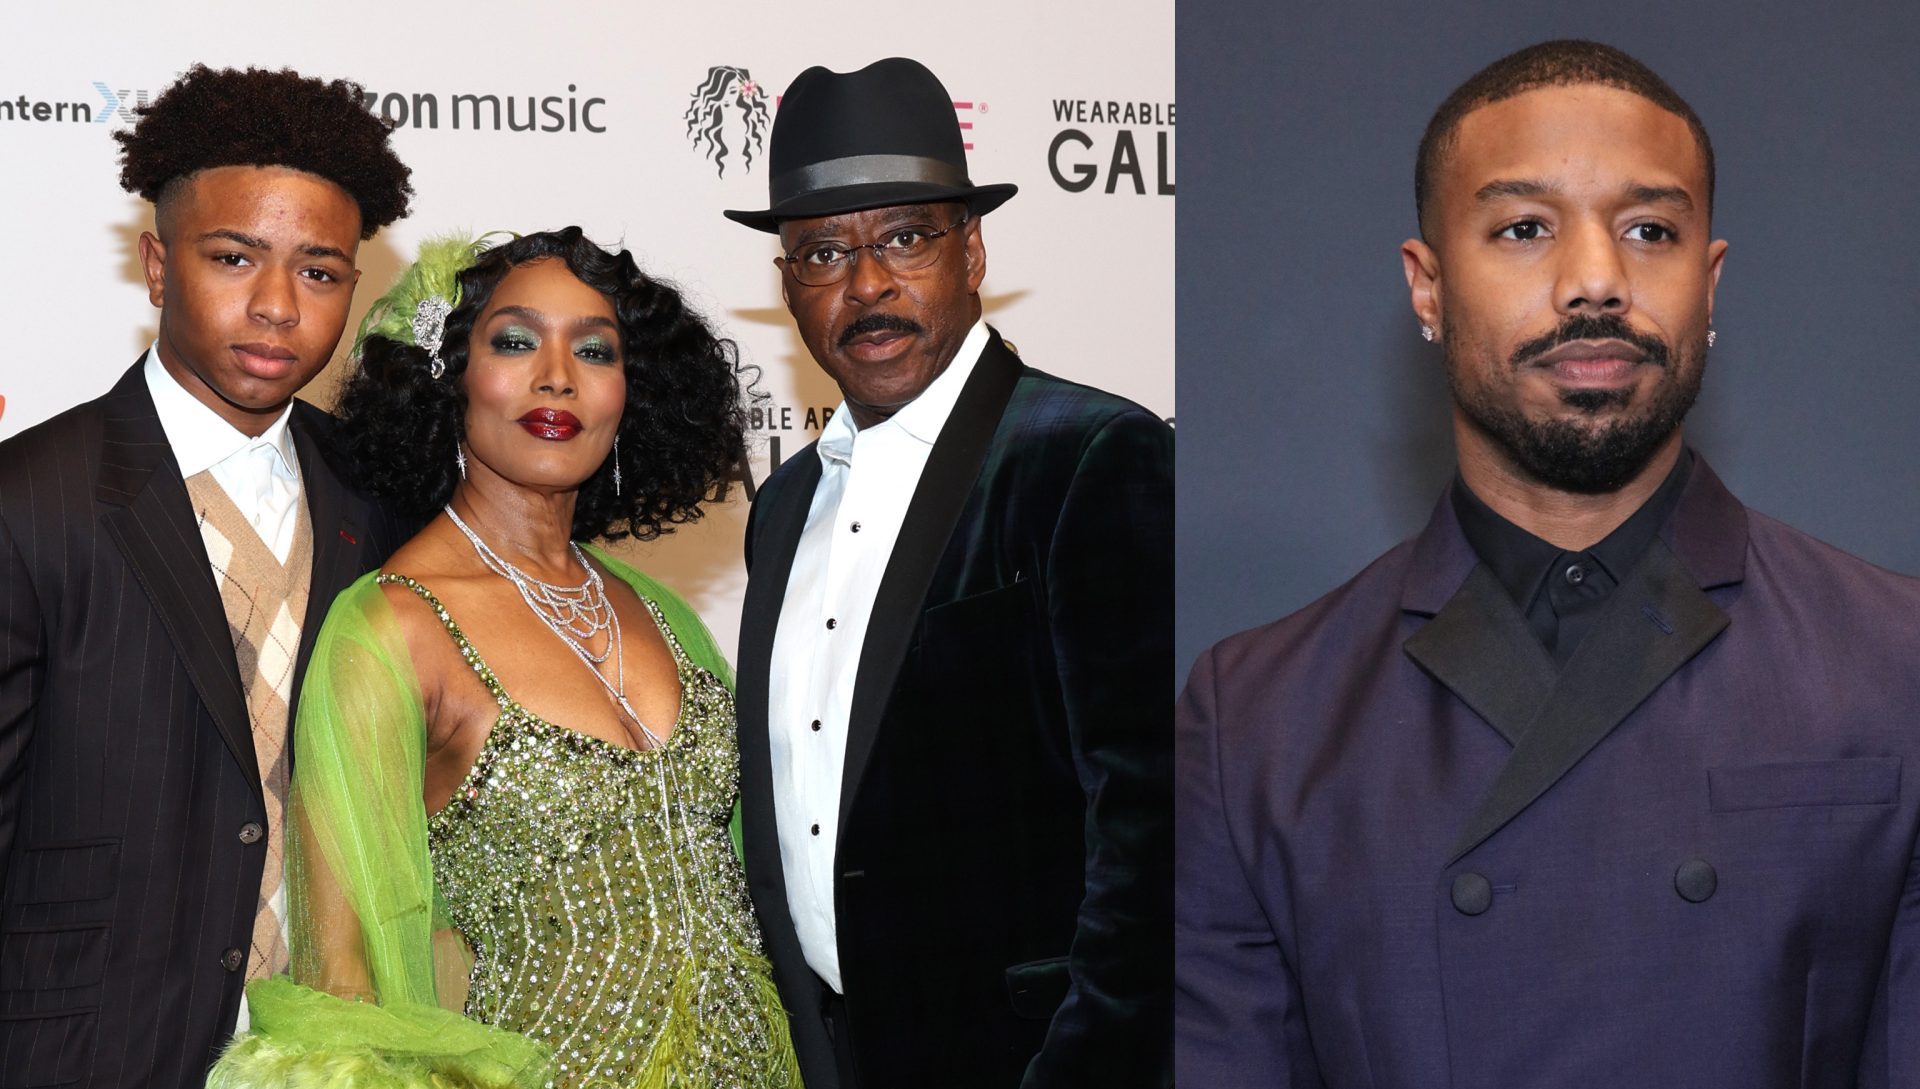 WATCH: Angela Bassett's Son Slater Apologizes To Michael B. Jordan After Naming Him In 'Dead' Viral Prank